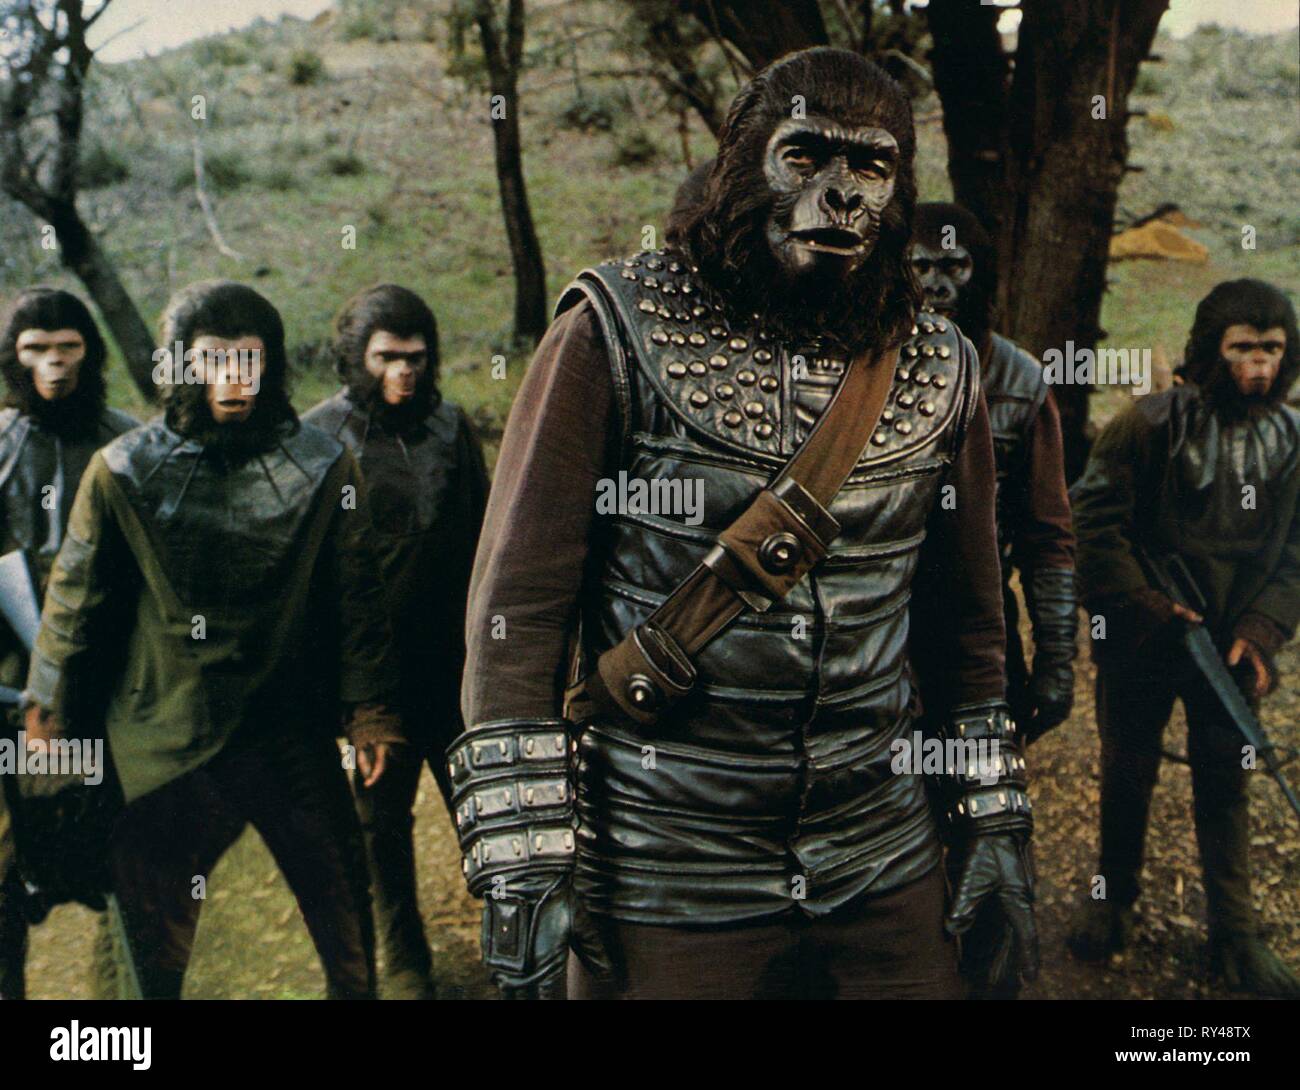 GENERAL APE SCENE, BATTLE FOR THE PLANET OF THE APES, 1973 Stock Photo